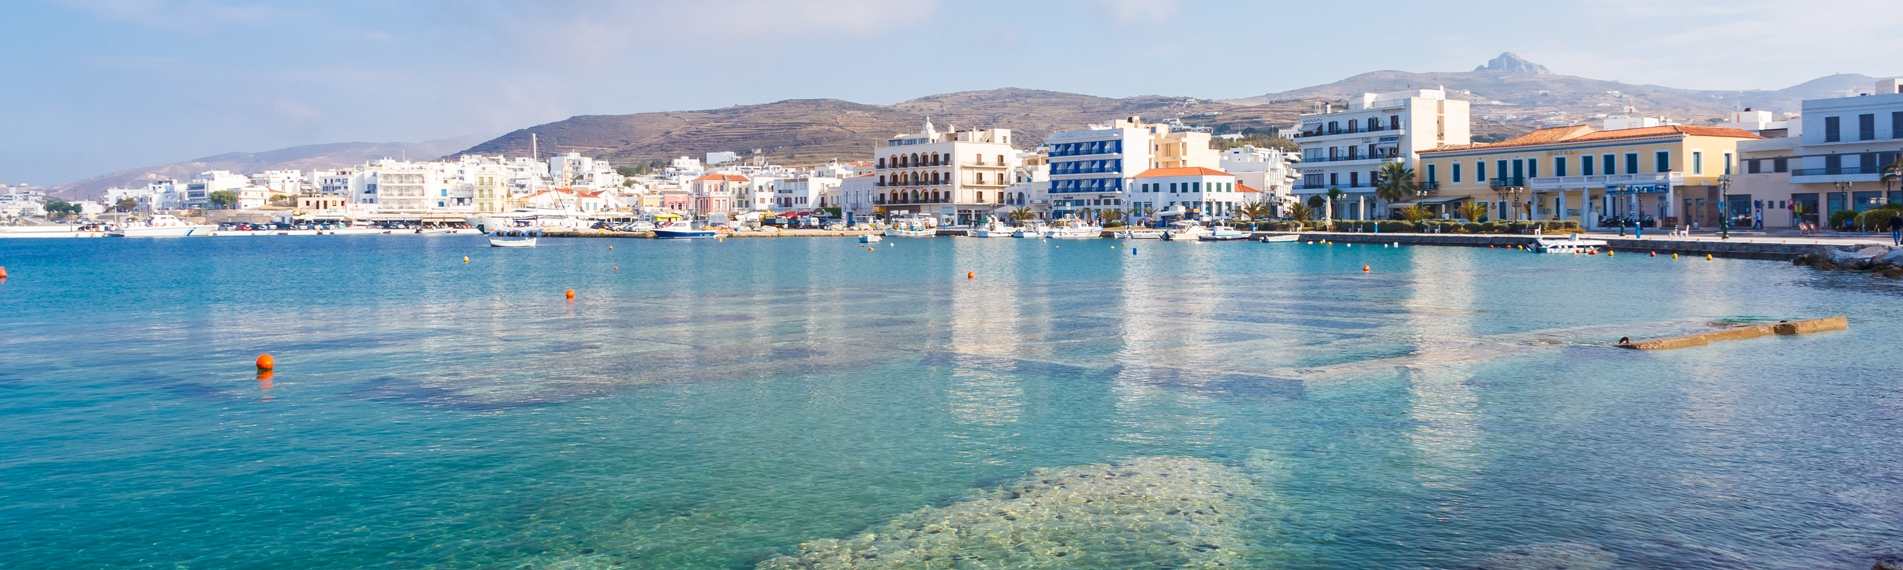 Transparent water, blue sky and white houses in Tinos, the Cyclades.